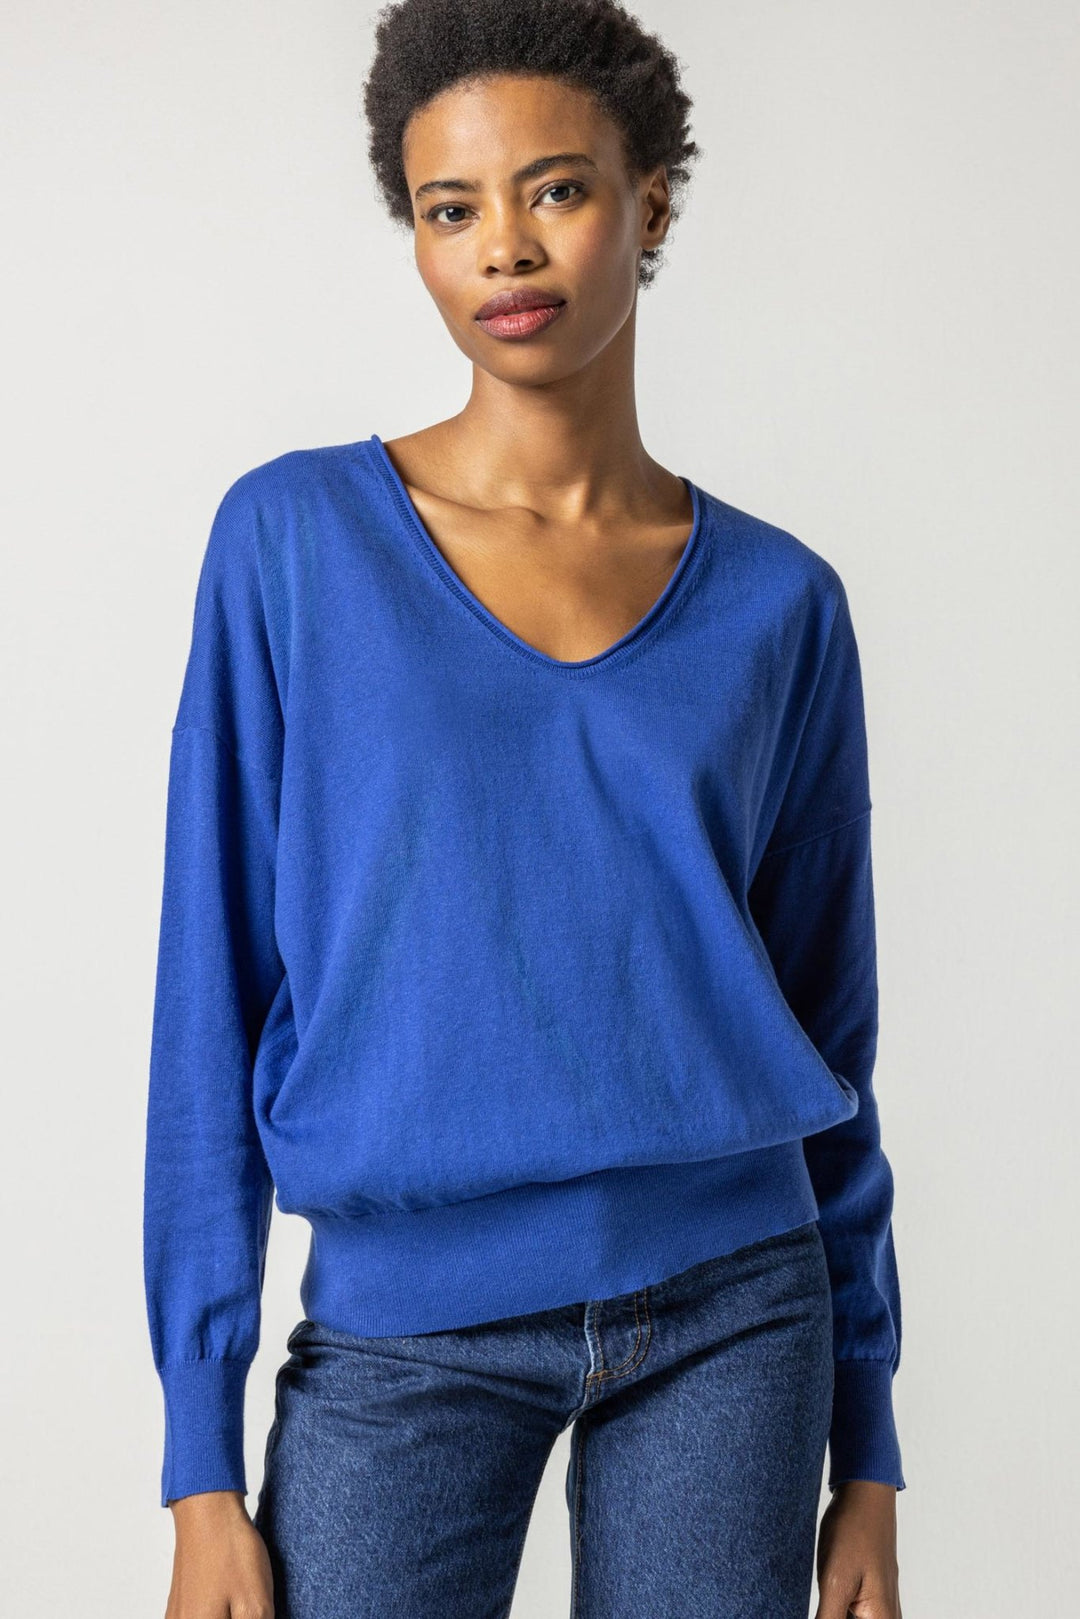 Lilla - Relaxed L/S VNeck Sweater: Cobalt - Shorely Chic Boutique